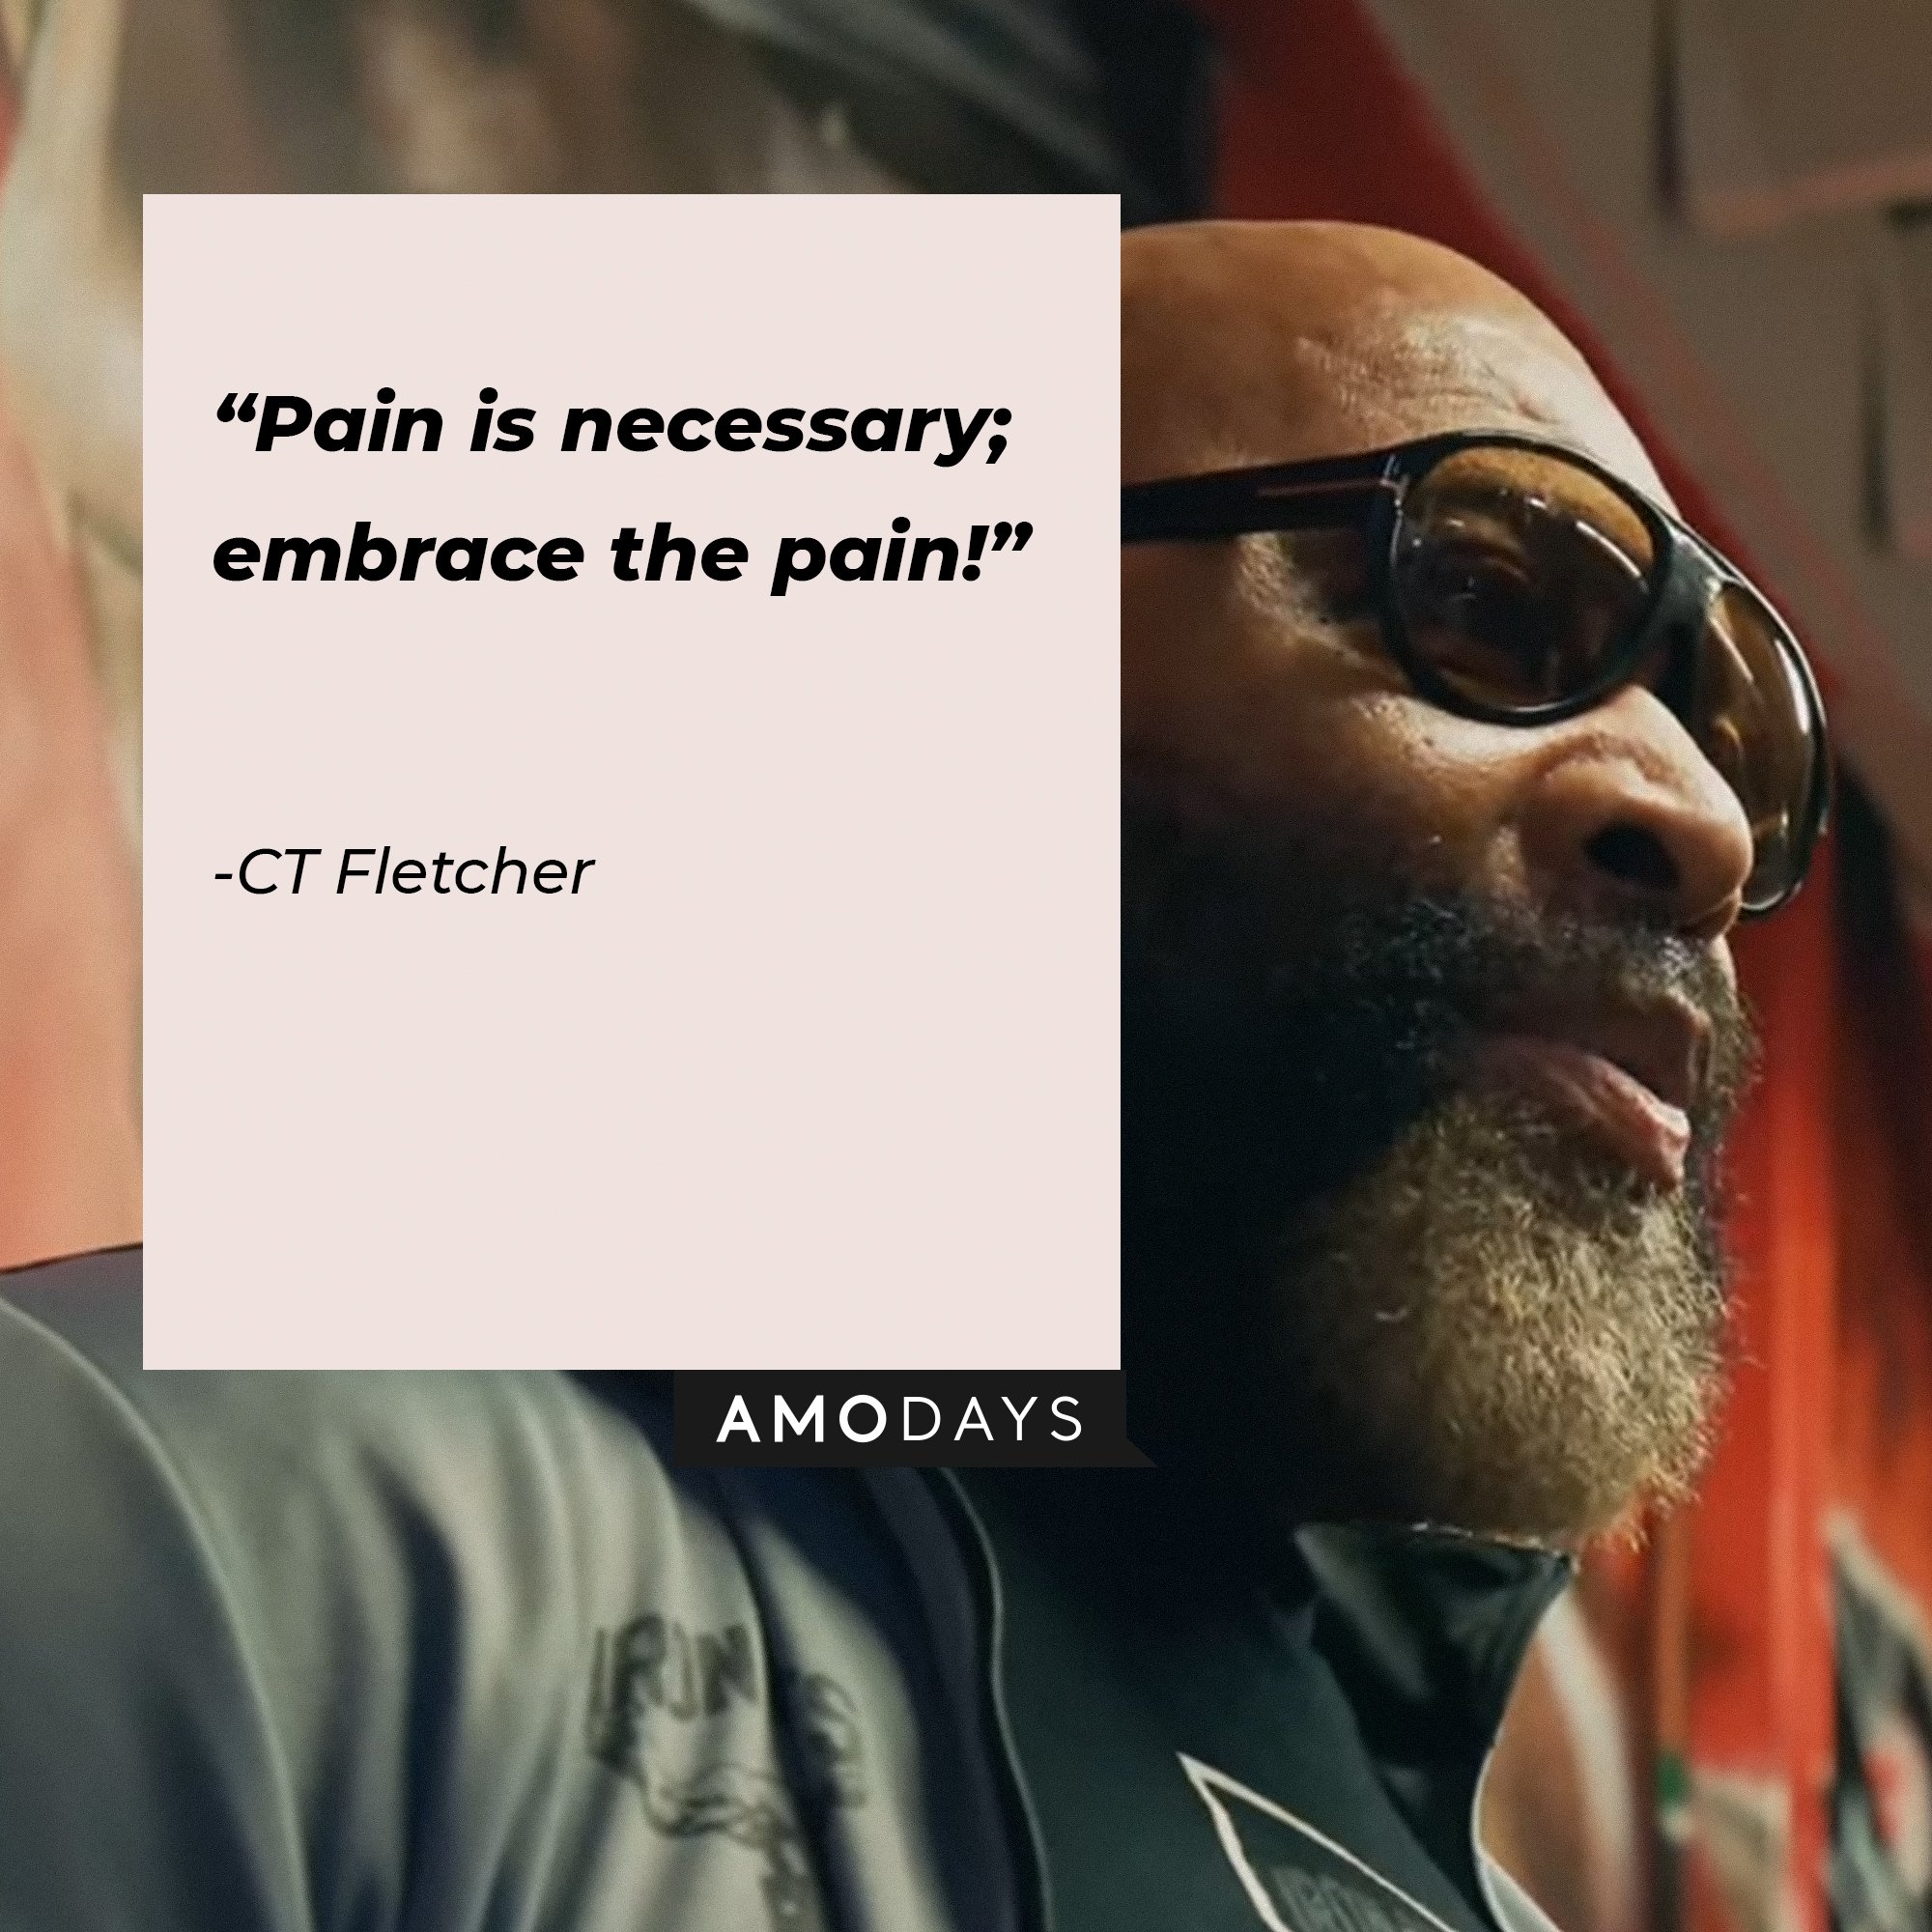 CT Fletcher's quote:\\\\\\\\u00a0"Pain is necessary; embrace the pain!"\\\\\\\\u00a0| Image: AmoDays